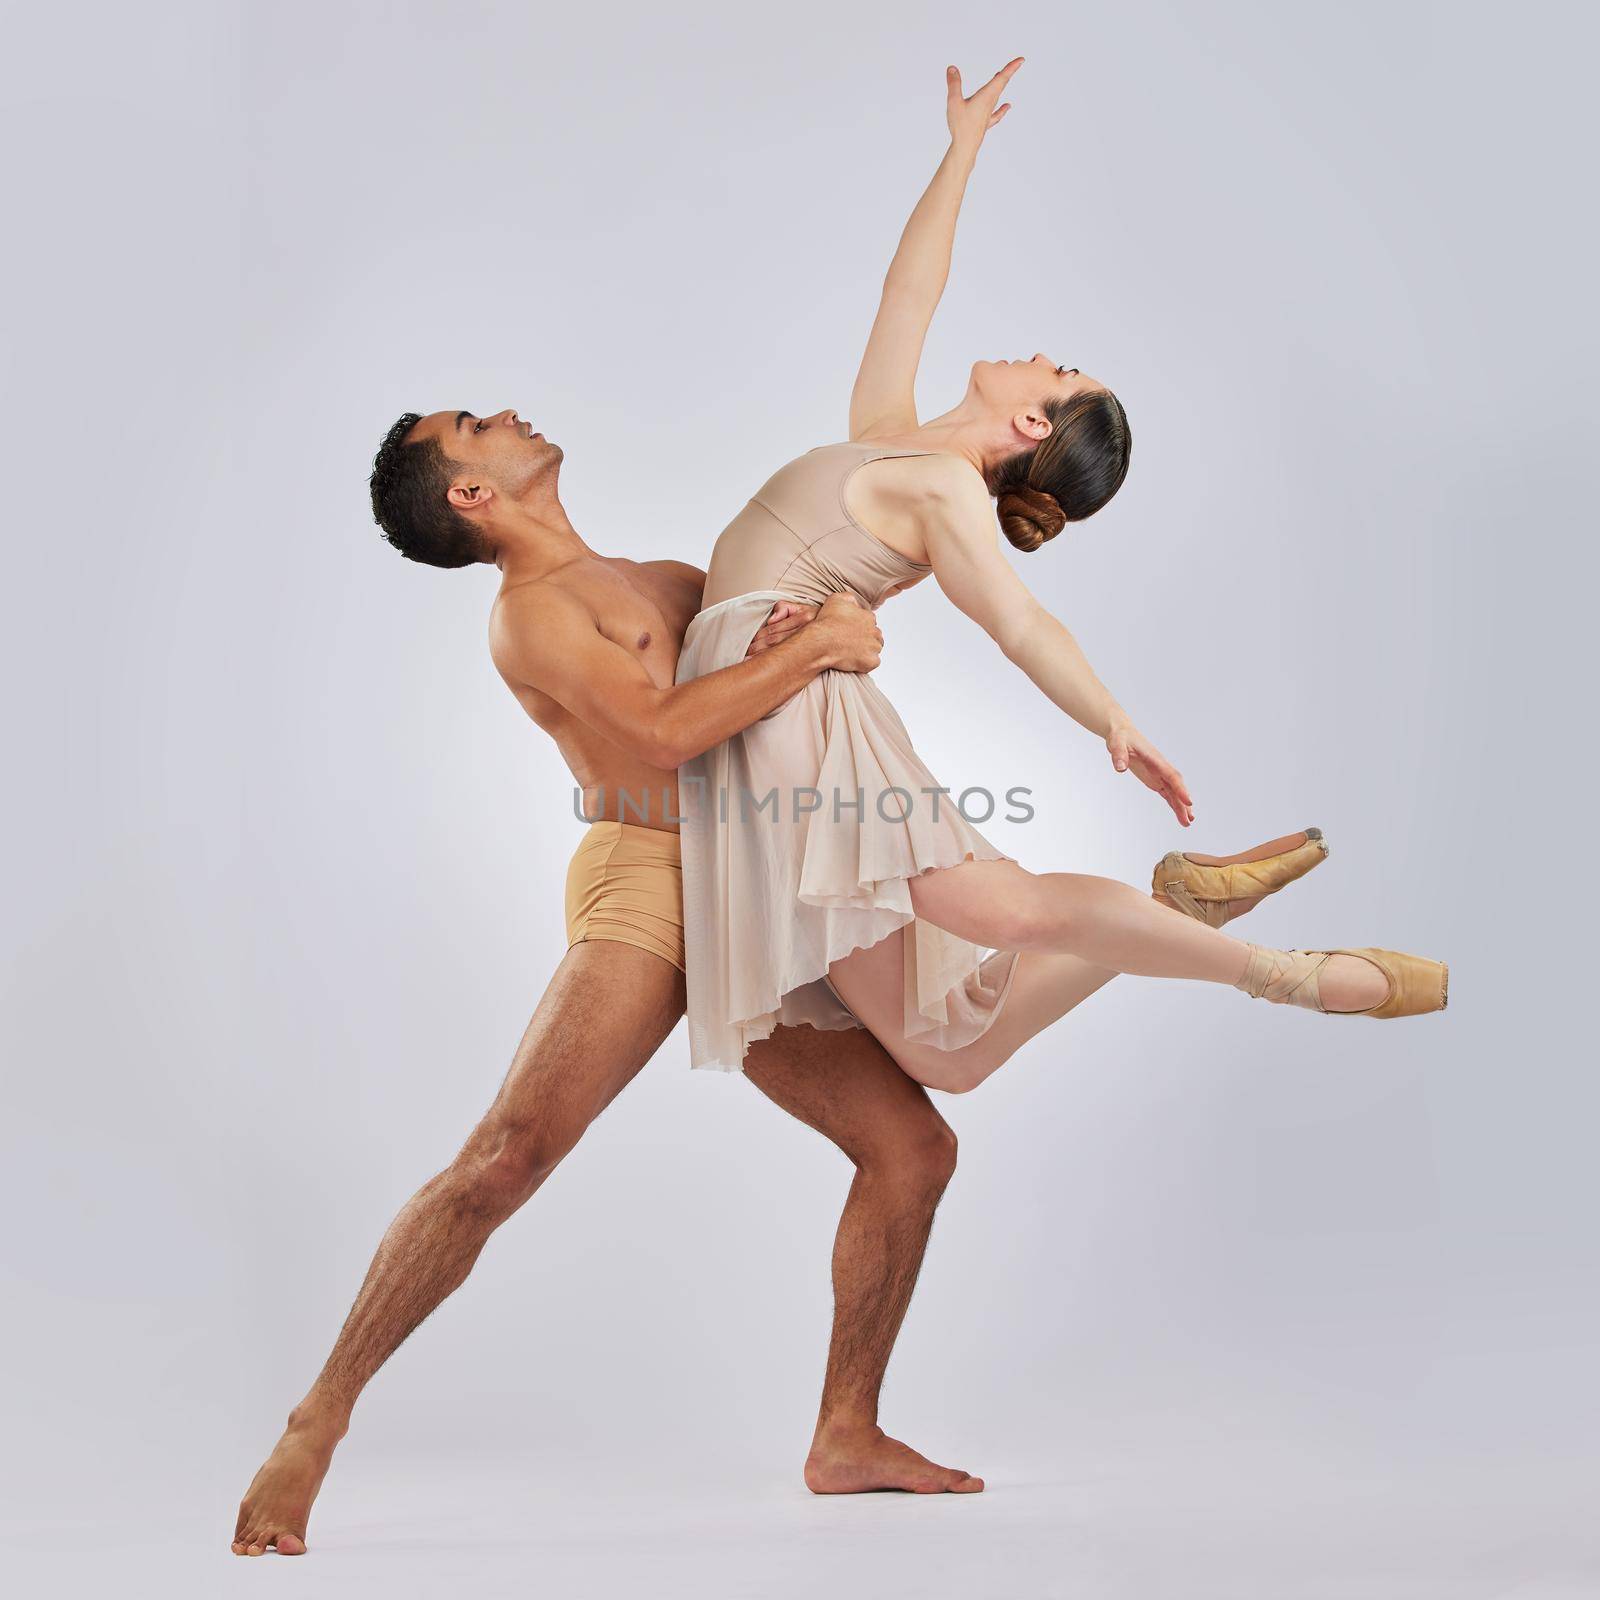 We dont need words to say how we feel. Studio shot of a young man and woman performing a ballet recital against a grey background